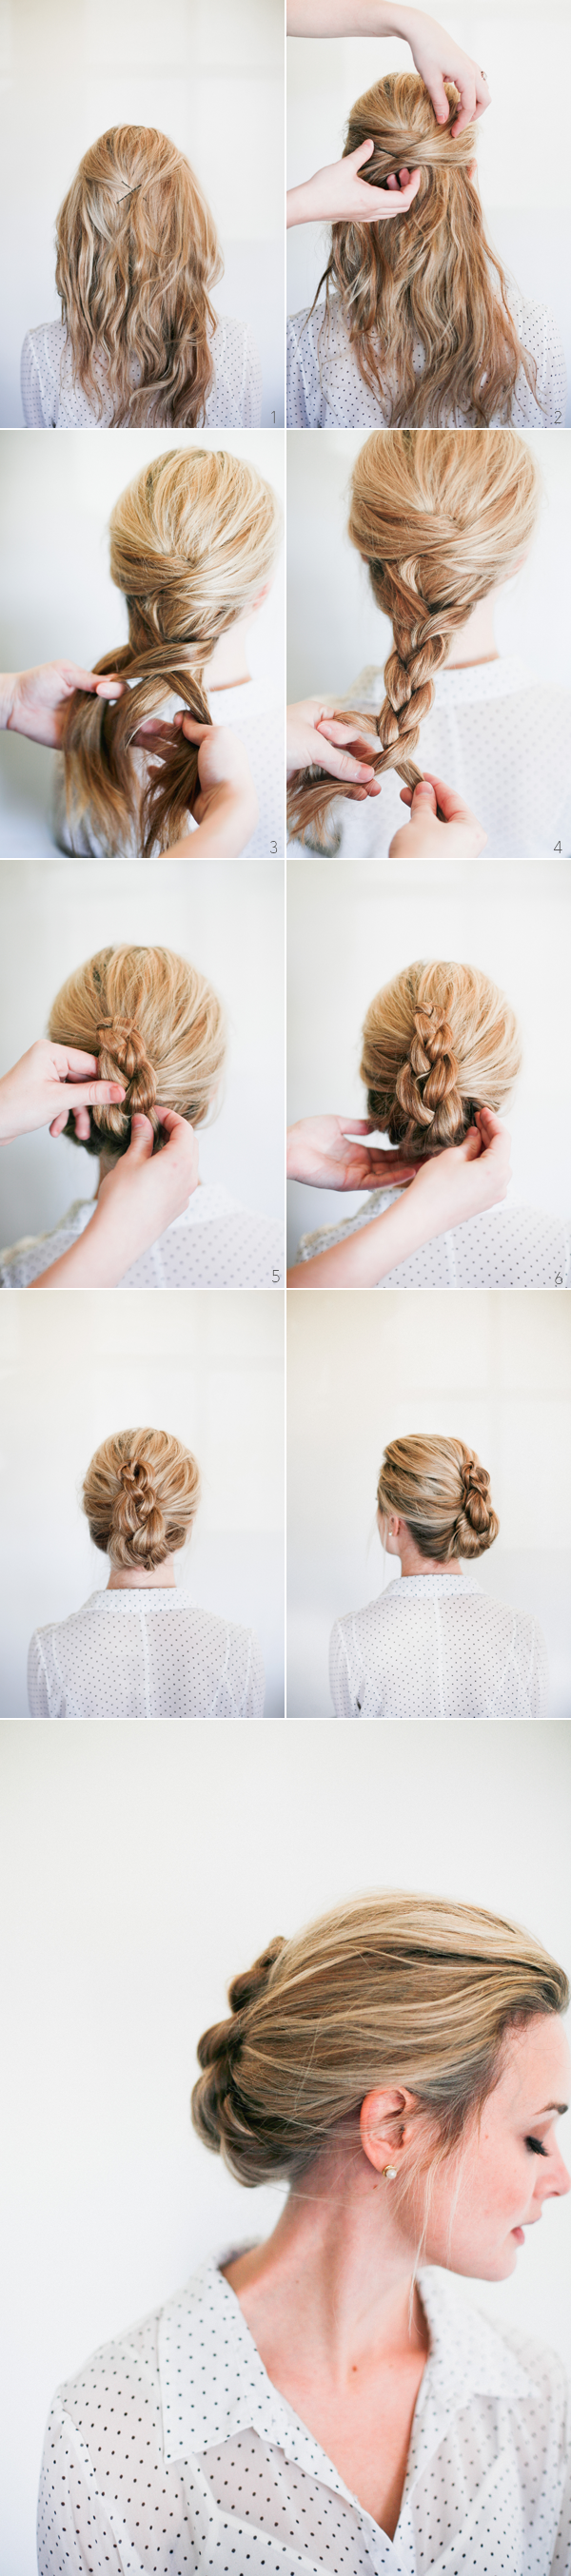 20 Cute and Easy Hairstyle Ideas and Tutorials (5)